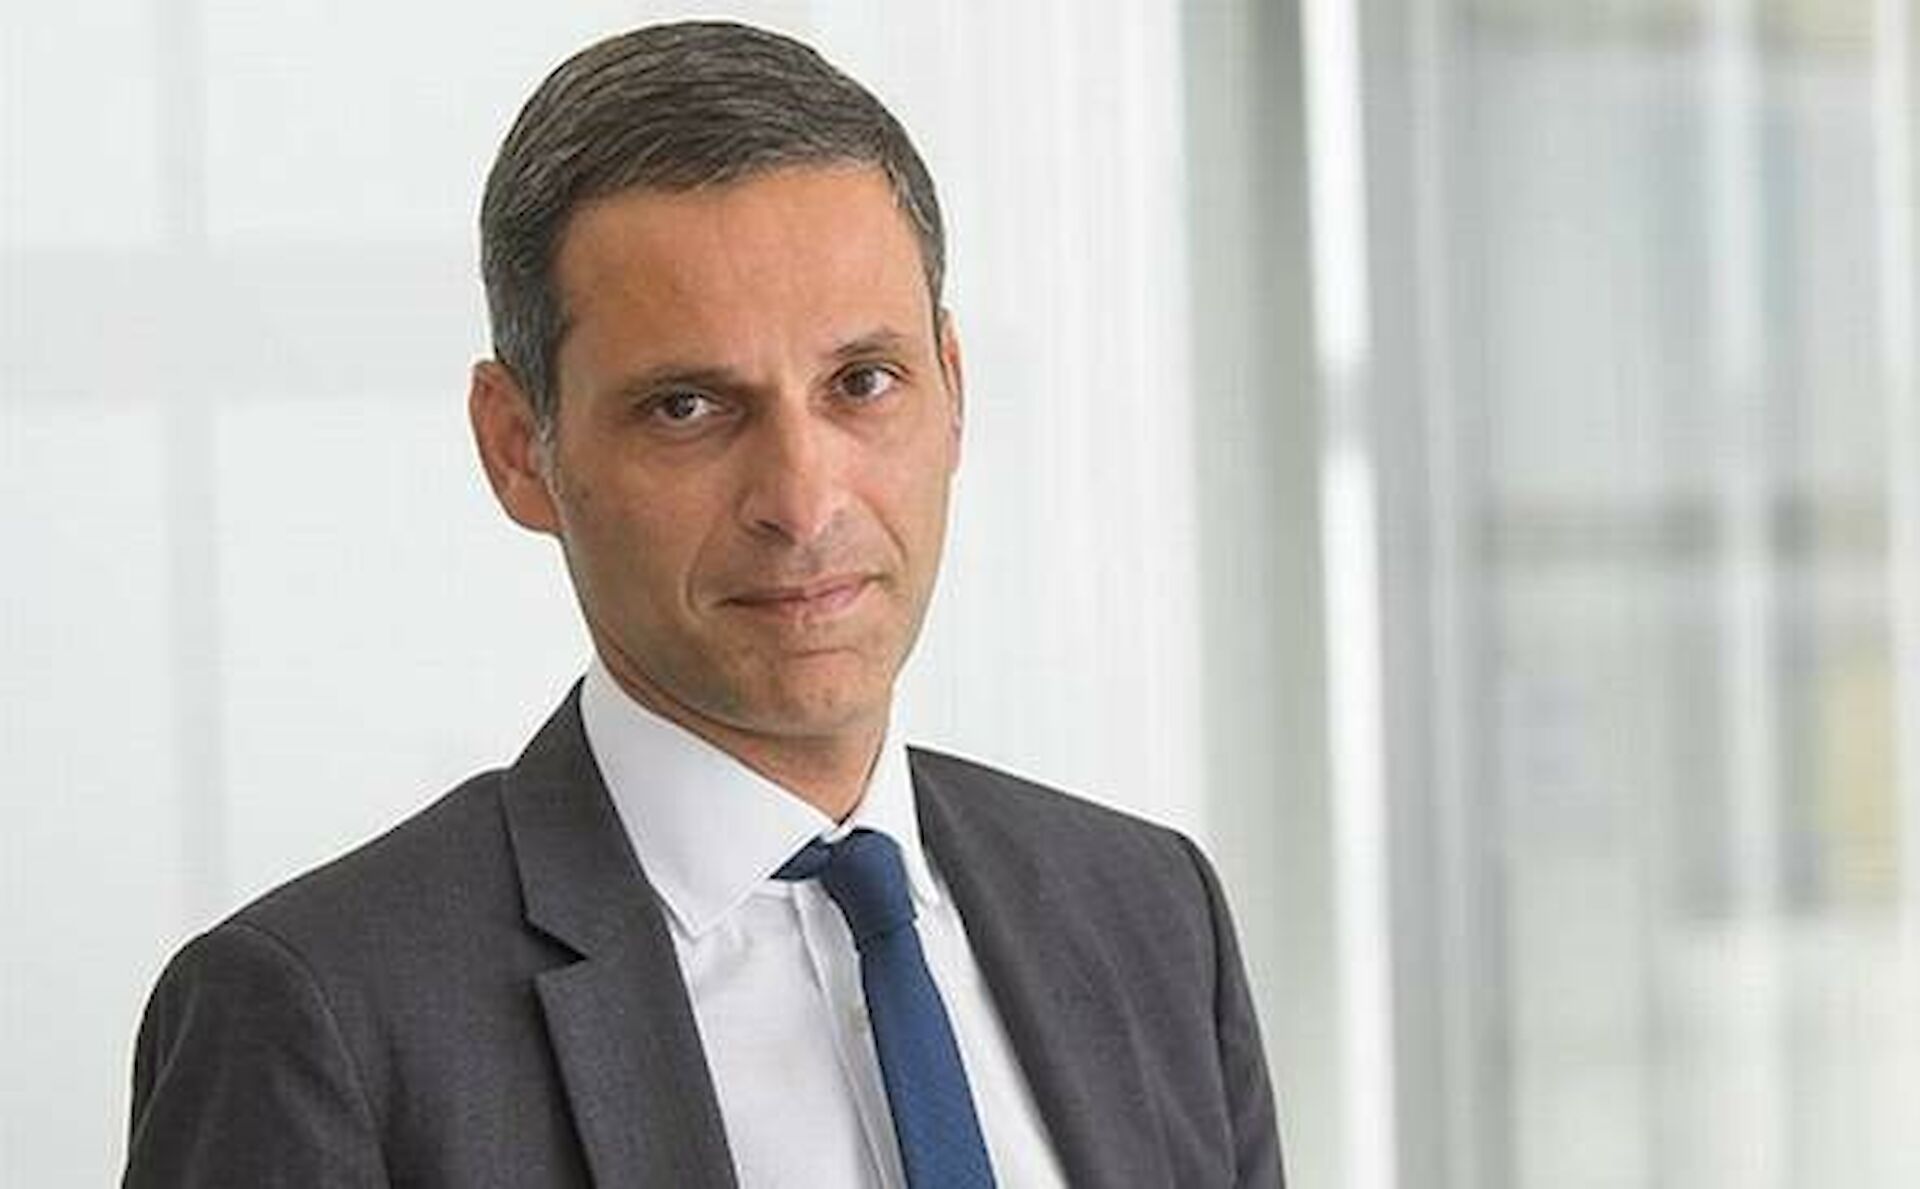 Port of Hamburg | Jacques Saadé appoints Rodolphe Saadé Chief Executive Officer of the CMA CGM Group